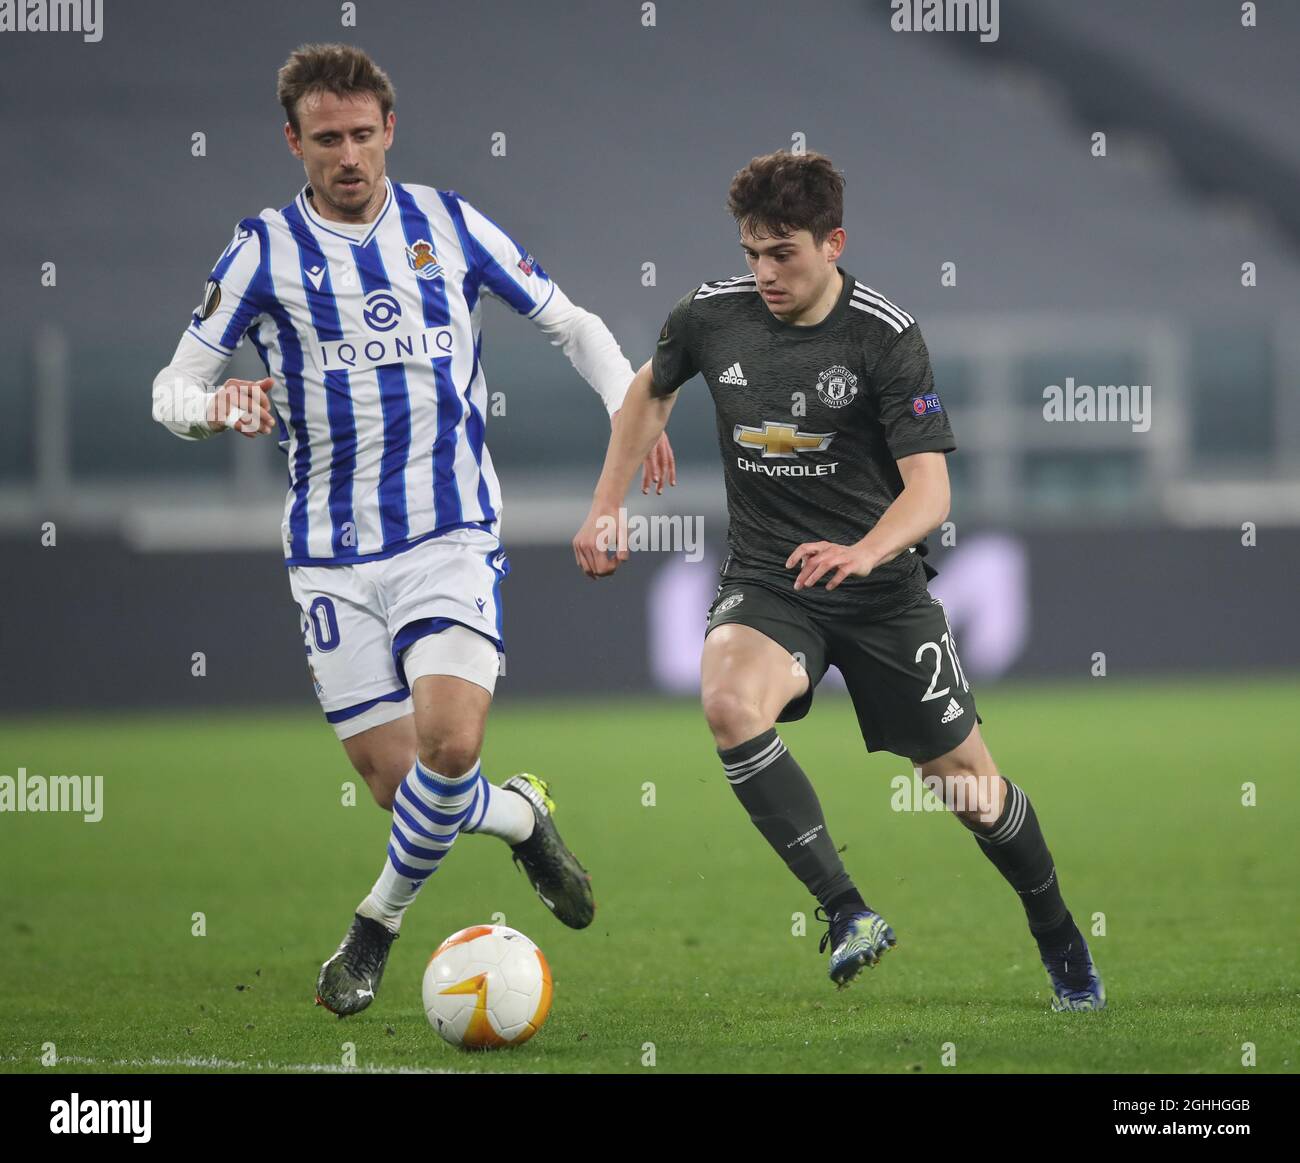 Daniel James of Manchester United tackles Nacho Monreal of Real Sociedad during the UEFA Europa League match at Juventus Stadium, Turin. Picture date: 18th February 2021. Picture credit should read: Jonathan Moscrop/Sportimage via PA Images Stock Photo